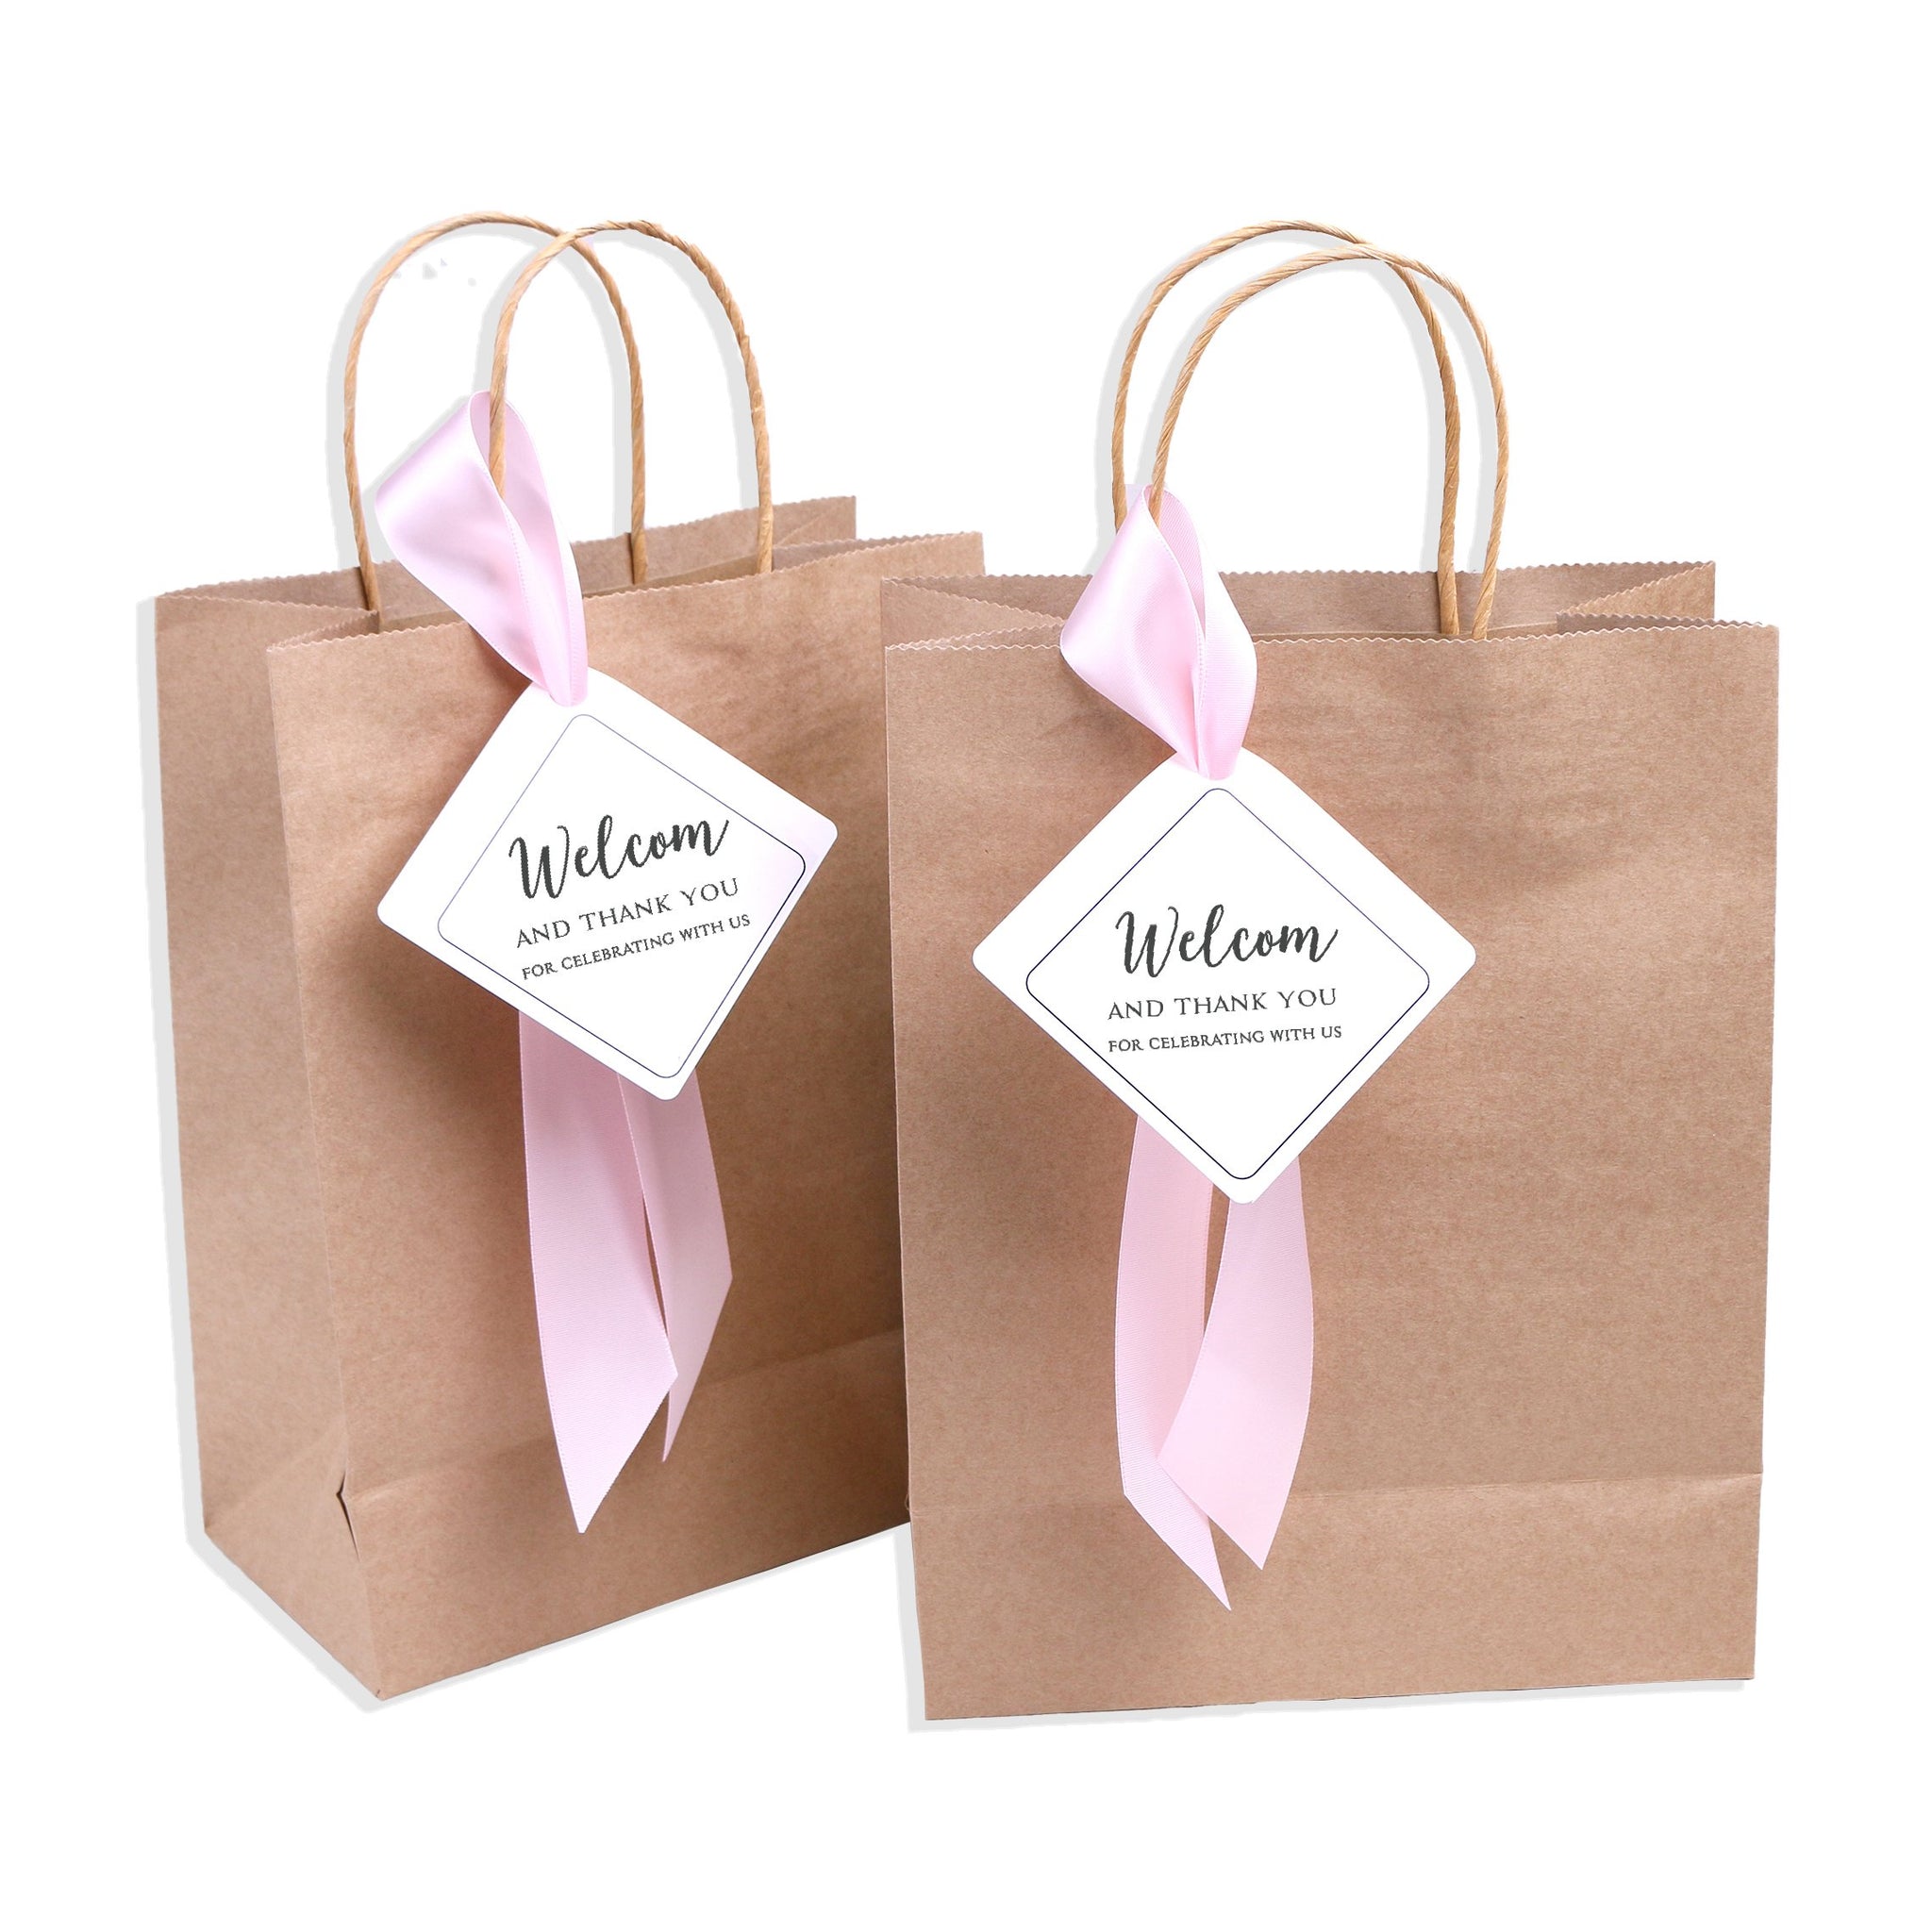 Custom Jewelry Store Personalized Paper Gift Bags- Custom Wedding Guest Gift  bags AMGB-7 | Wedding guest gift bag, Wedding gifts for guests,  Personalized paper gift bags